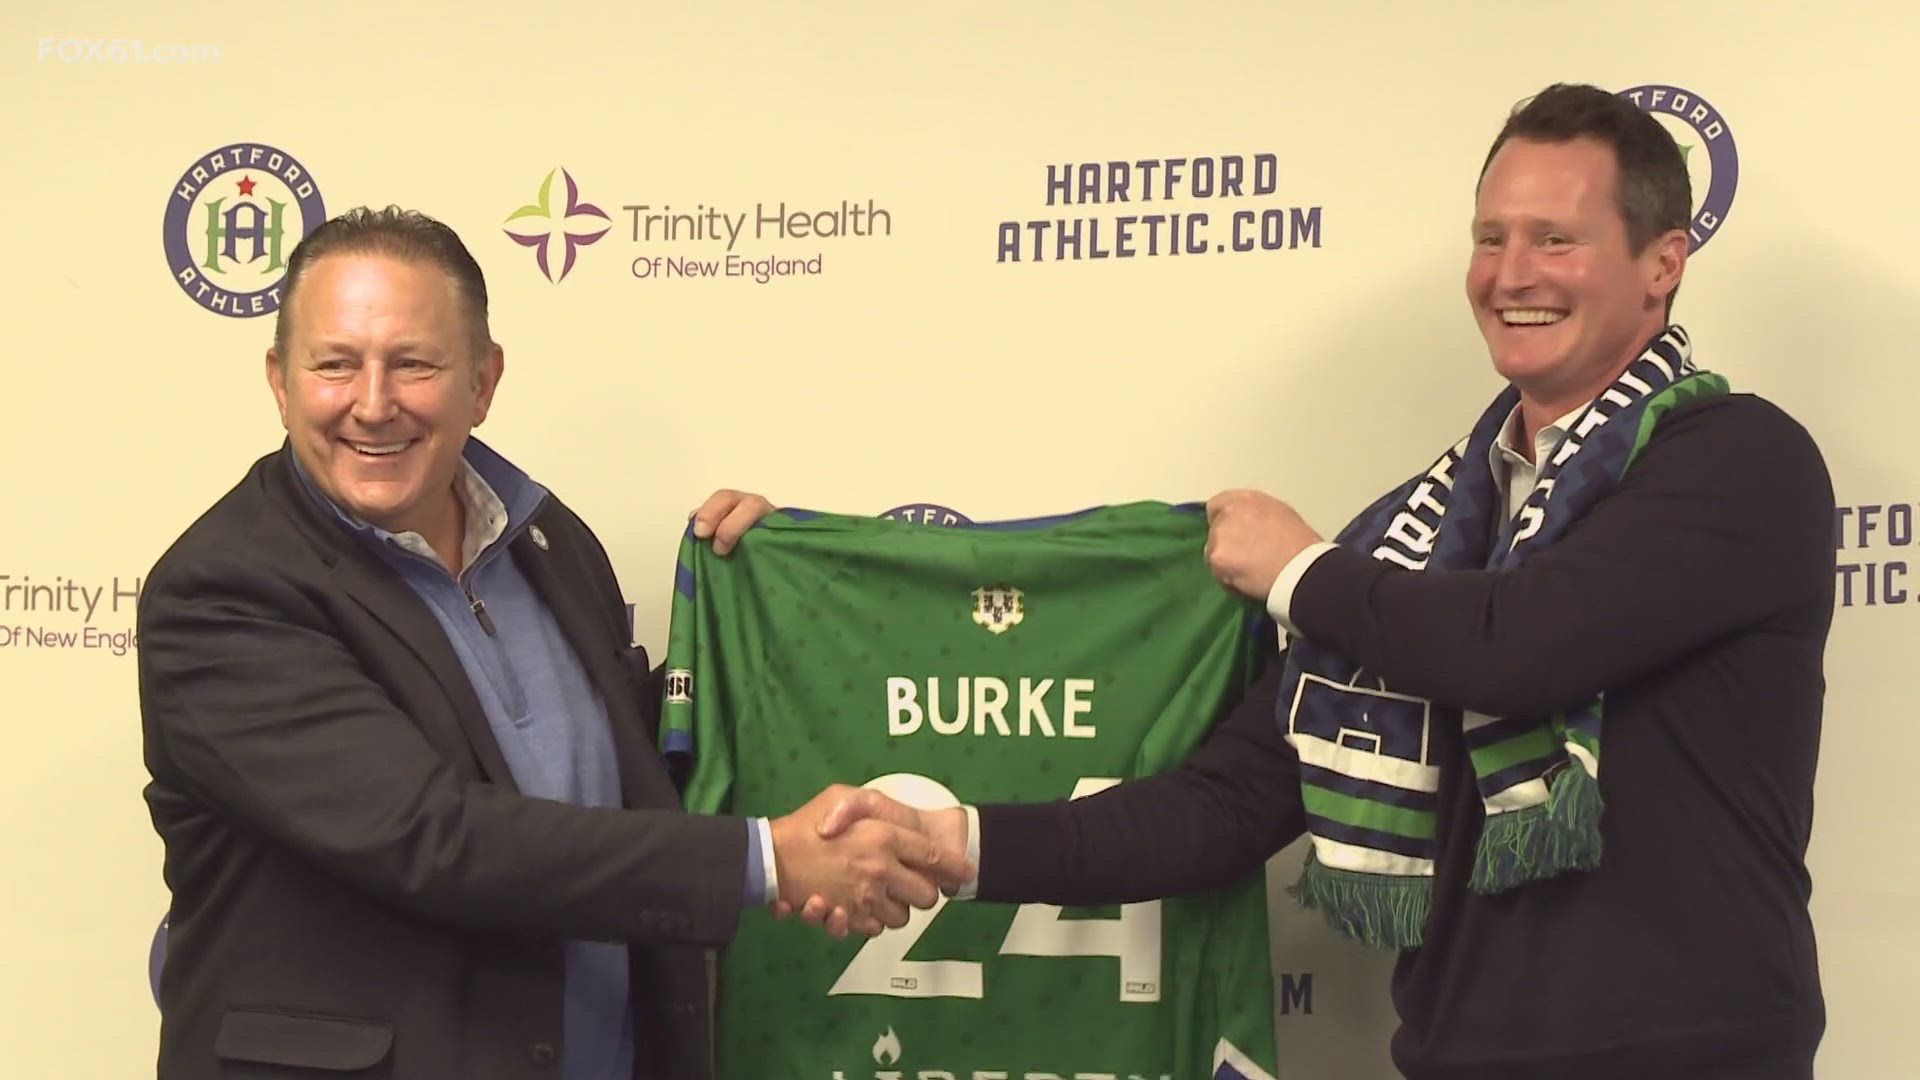 Brendan Burke inherits a club that finished last in their conference.